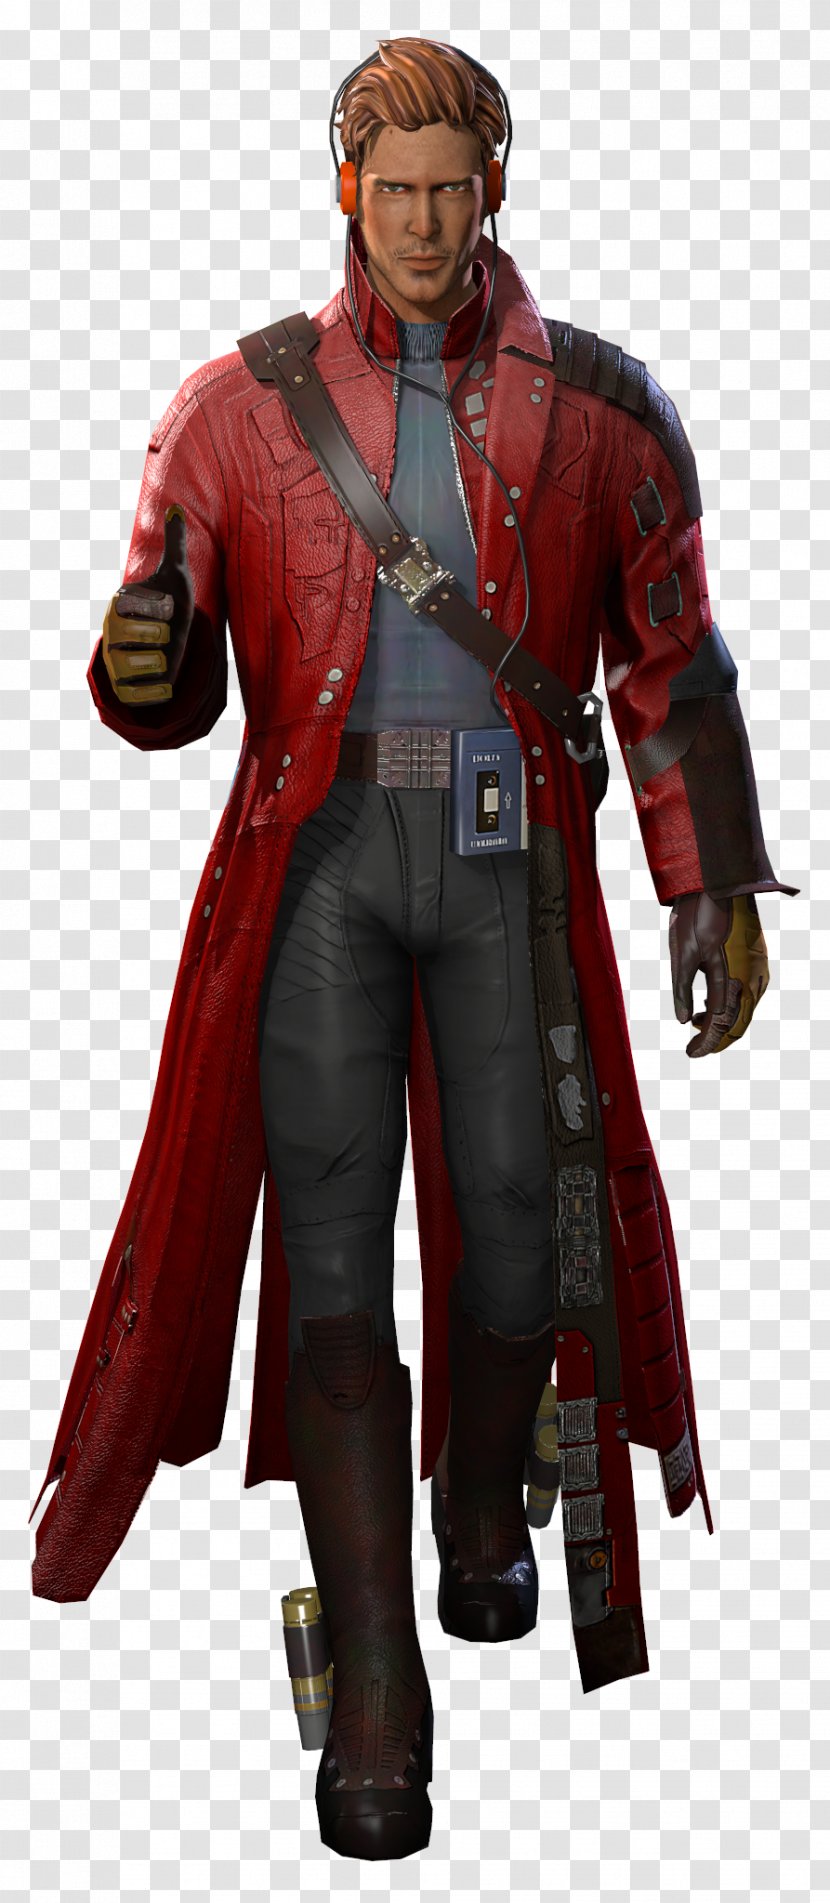 Star-Lord Marvel Heroes 2016 Guardians Of The Galaxy Iceman Costume - Avengers Alliance Transparent PNG